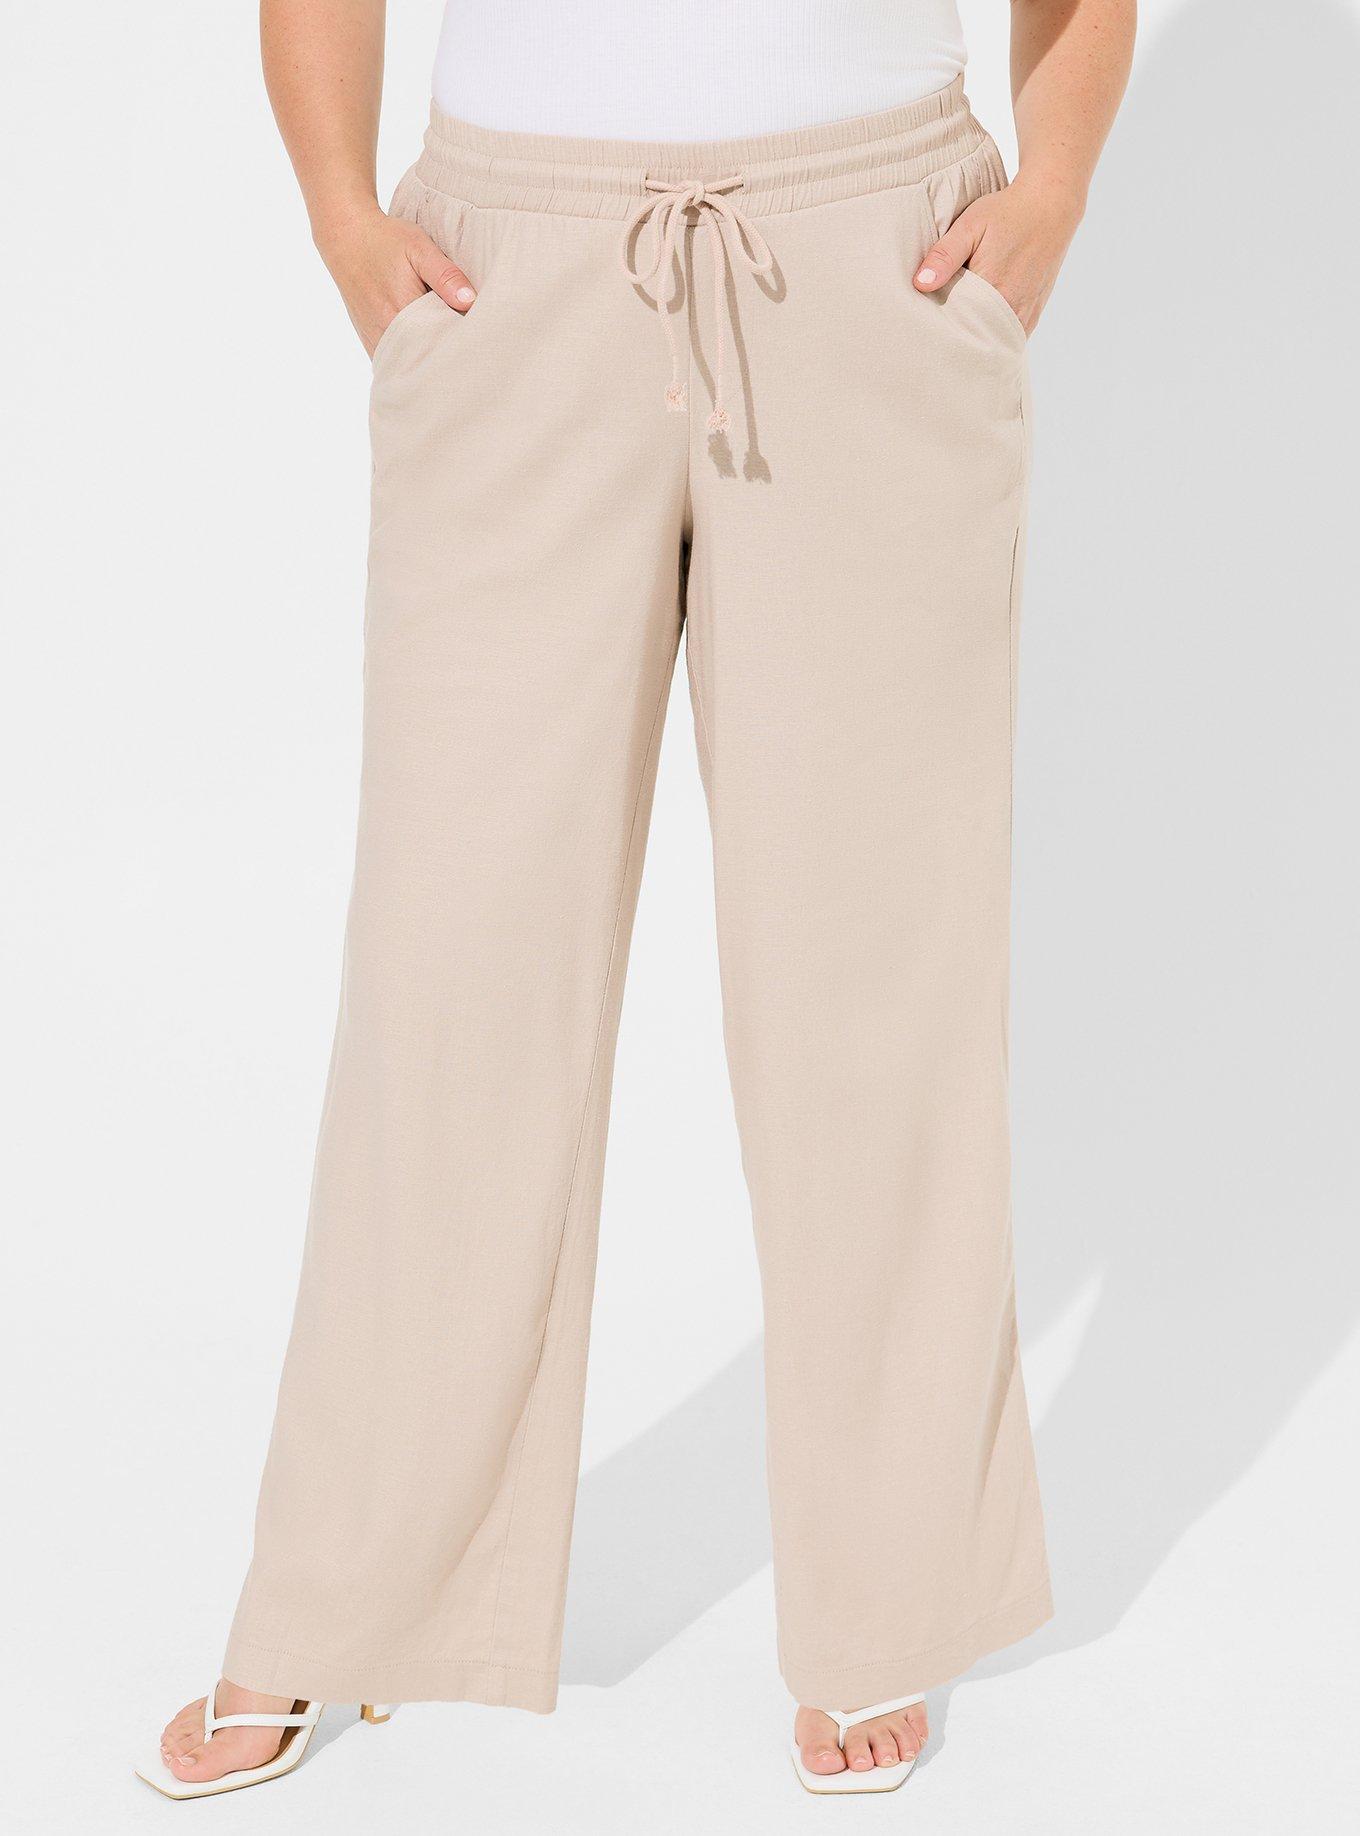 Plus Size - Pull-On Wide Leg Stretch Linen High-Rise Pant - Torrid